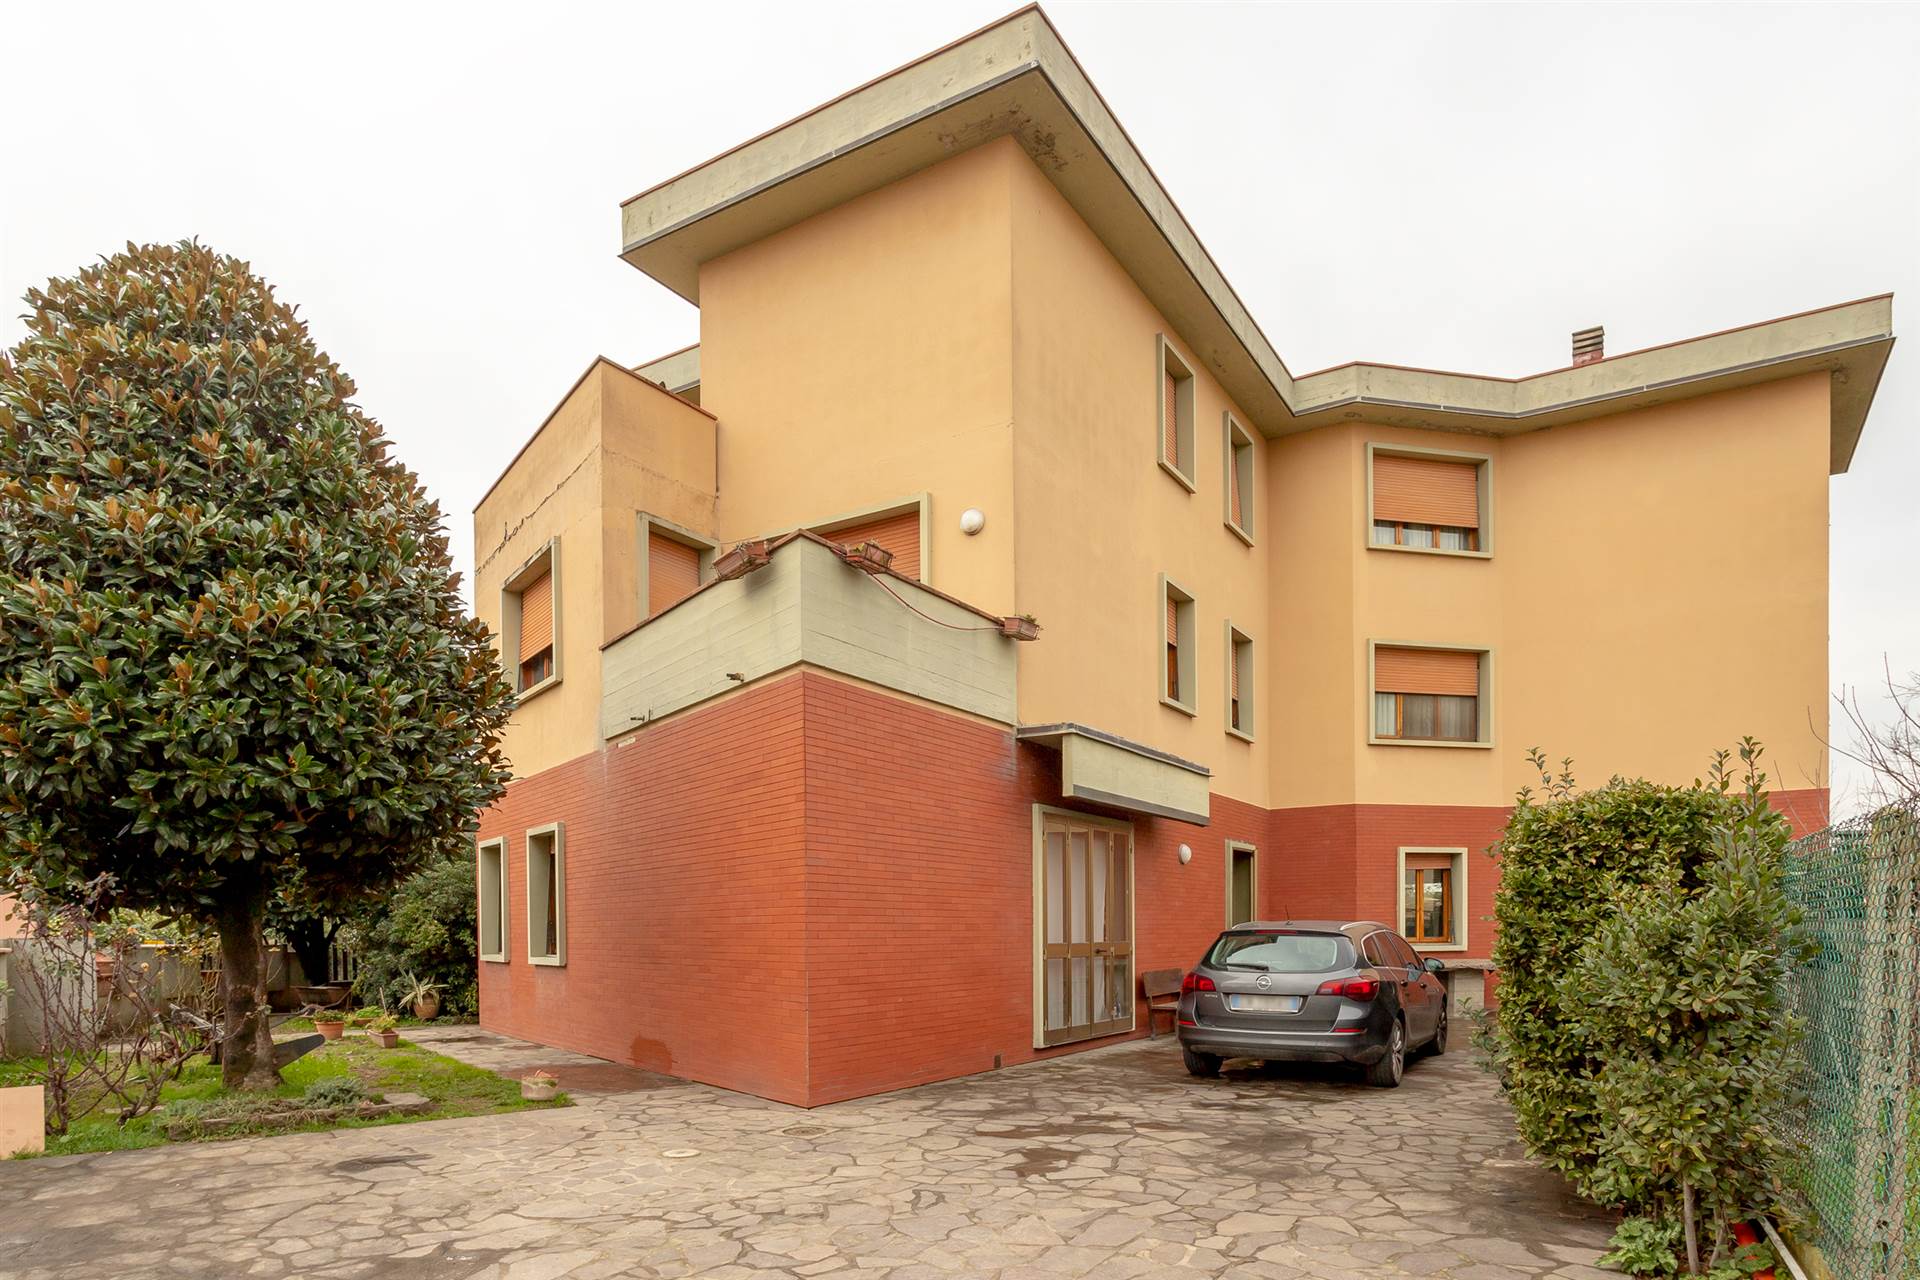 SAN GIUSTO, CAMPI BISENZIO, Villa for sale of 323 Sq. mt., Good condition, Heating Individual heating system, Energetic class: G, placed at Ground on 